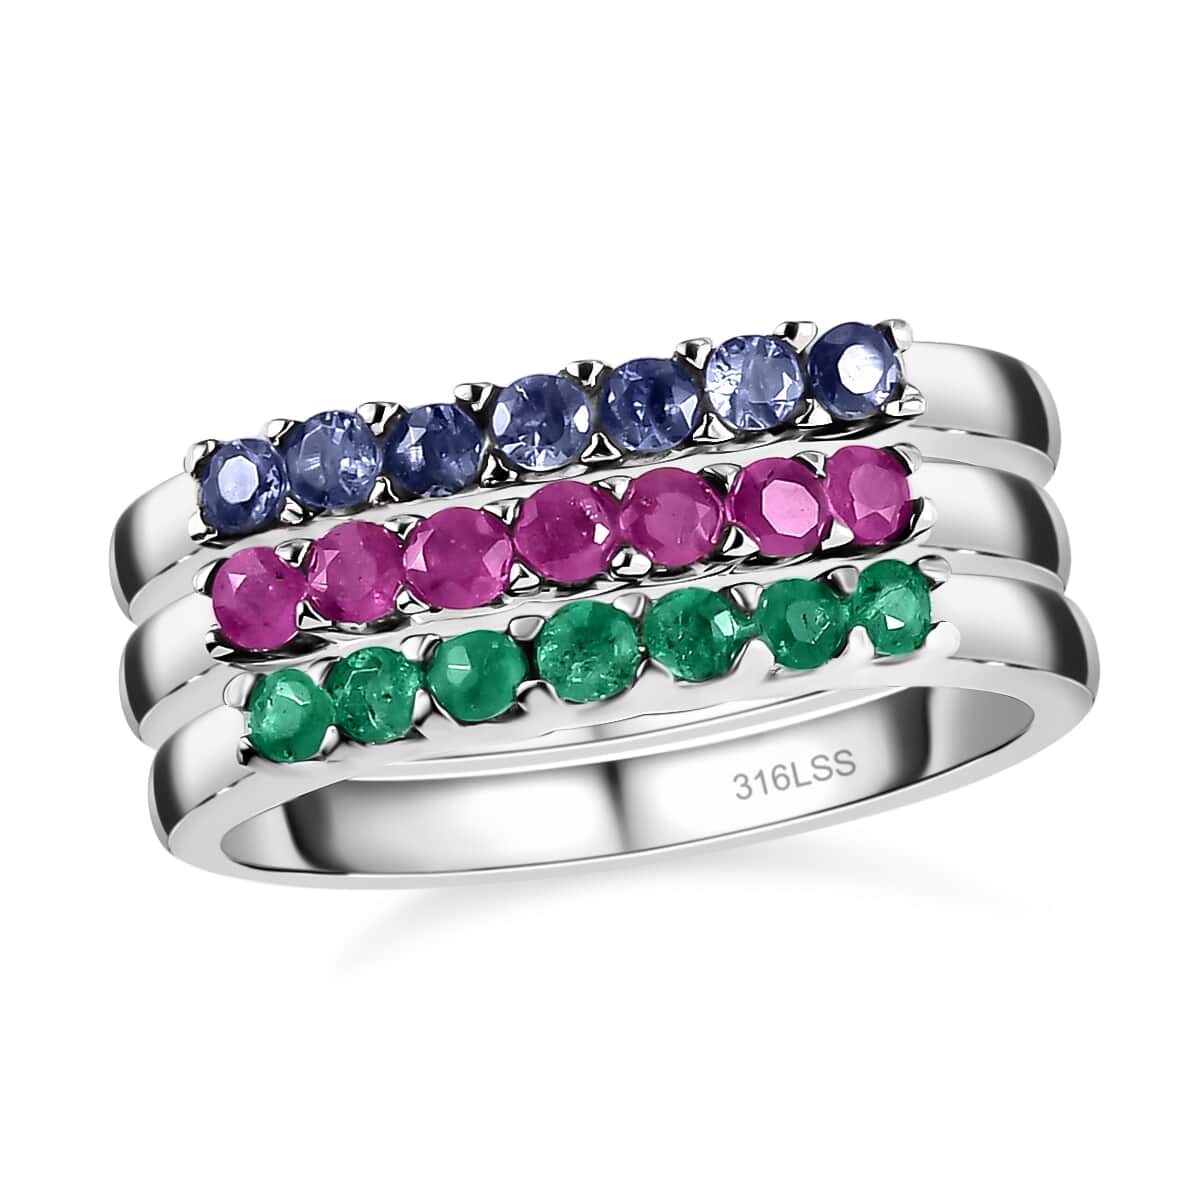 Set of 3 Niassa Ruby, Tanzanite and Kagem Zambian Emerald 1.00 ctw Ring, Set of 3 Rings in Stainless Steel, 7 Stone Wedding Band Rings For Women, Gifts For Her (Size 5.00) image number 3